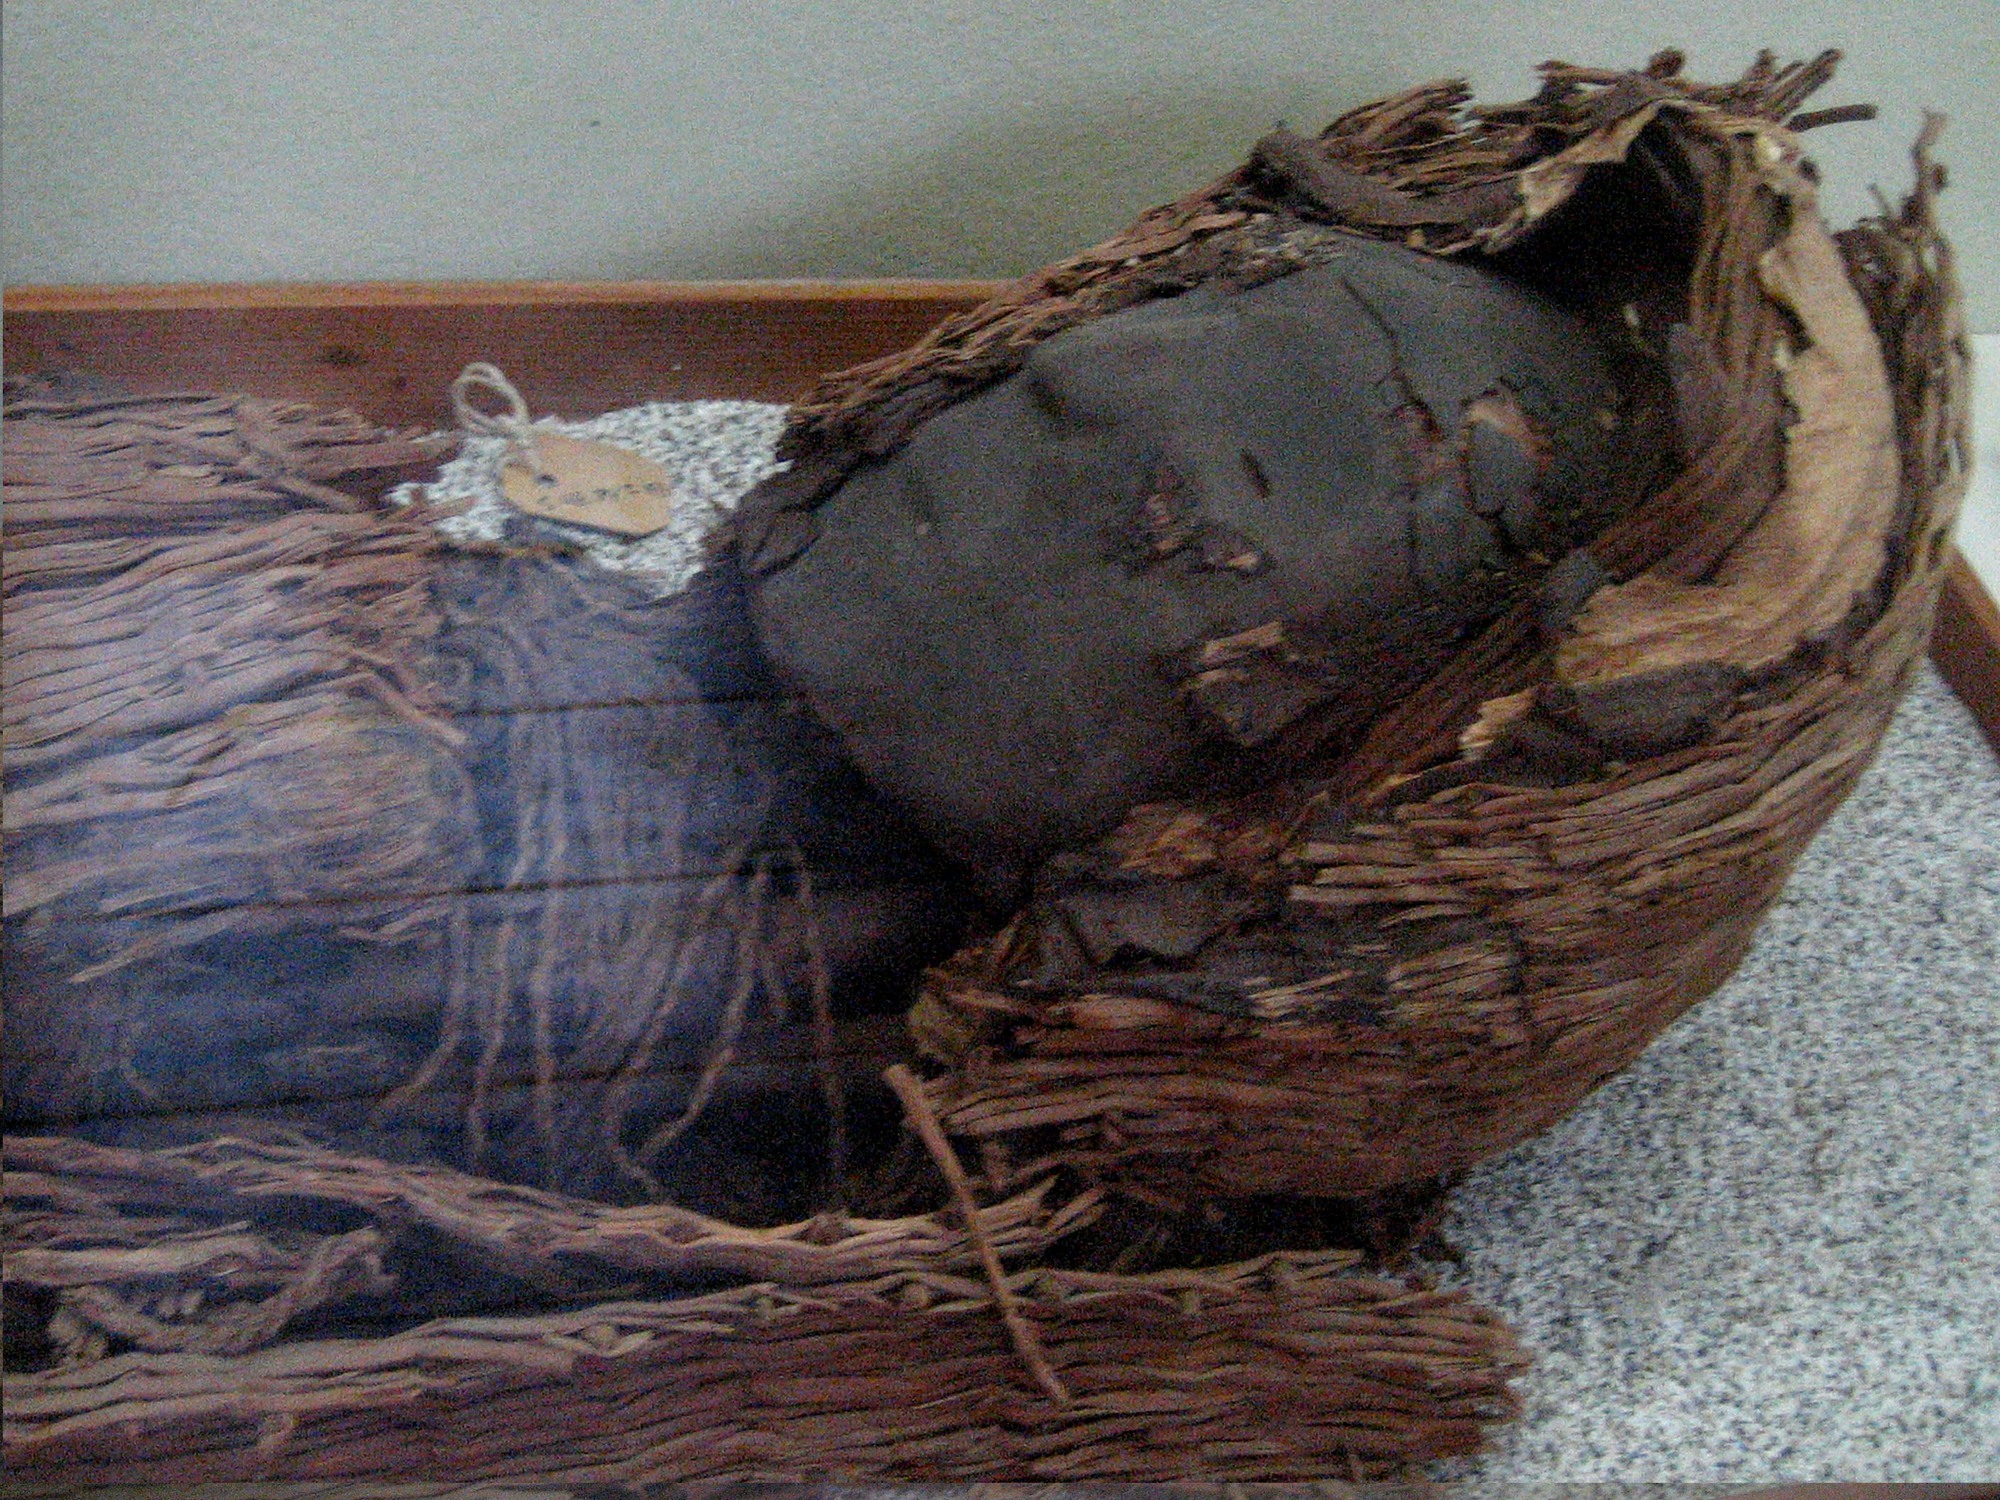 Not Egypt, which civilization adopted the practice of mummification first?  - Photo 4.